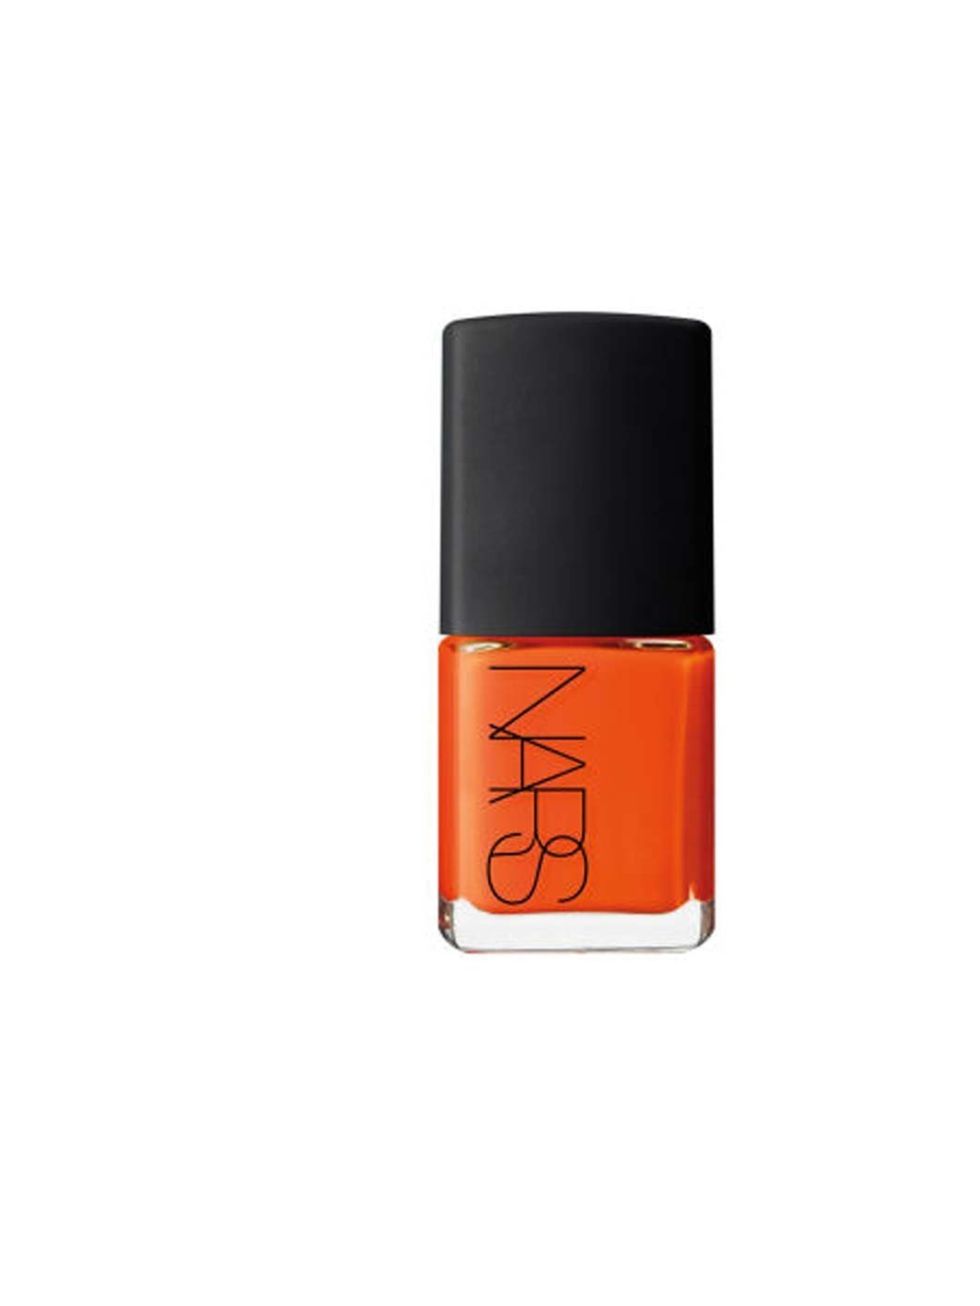 <p><a href="http://www.theukedit.com/nars-nail-varnish-various-shades/10449358.html">Nars Nail Varnish in Madness, £14.50</a></p><p>We're in love with this shade for nails. Erring toward a true cherry red but <em>so</em> much more interesting</p>